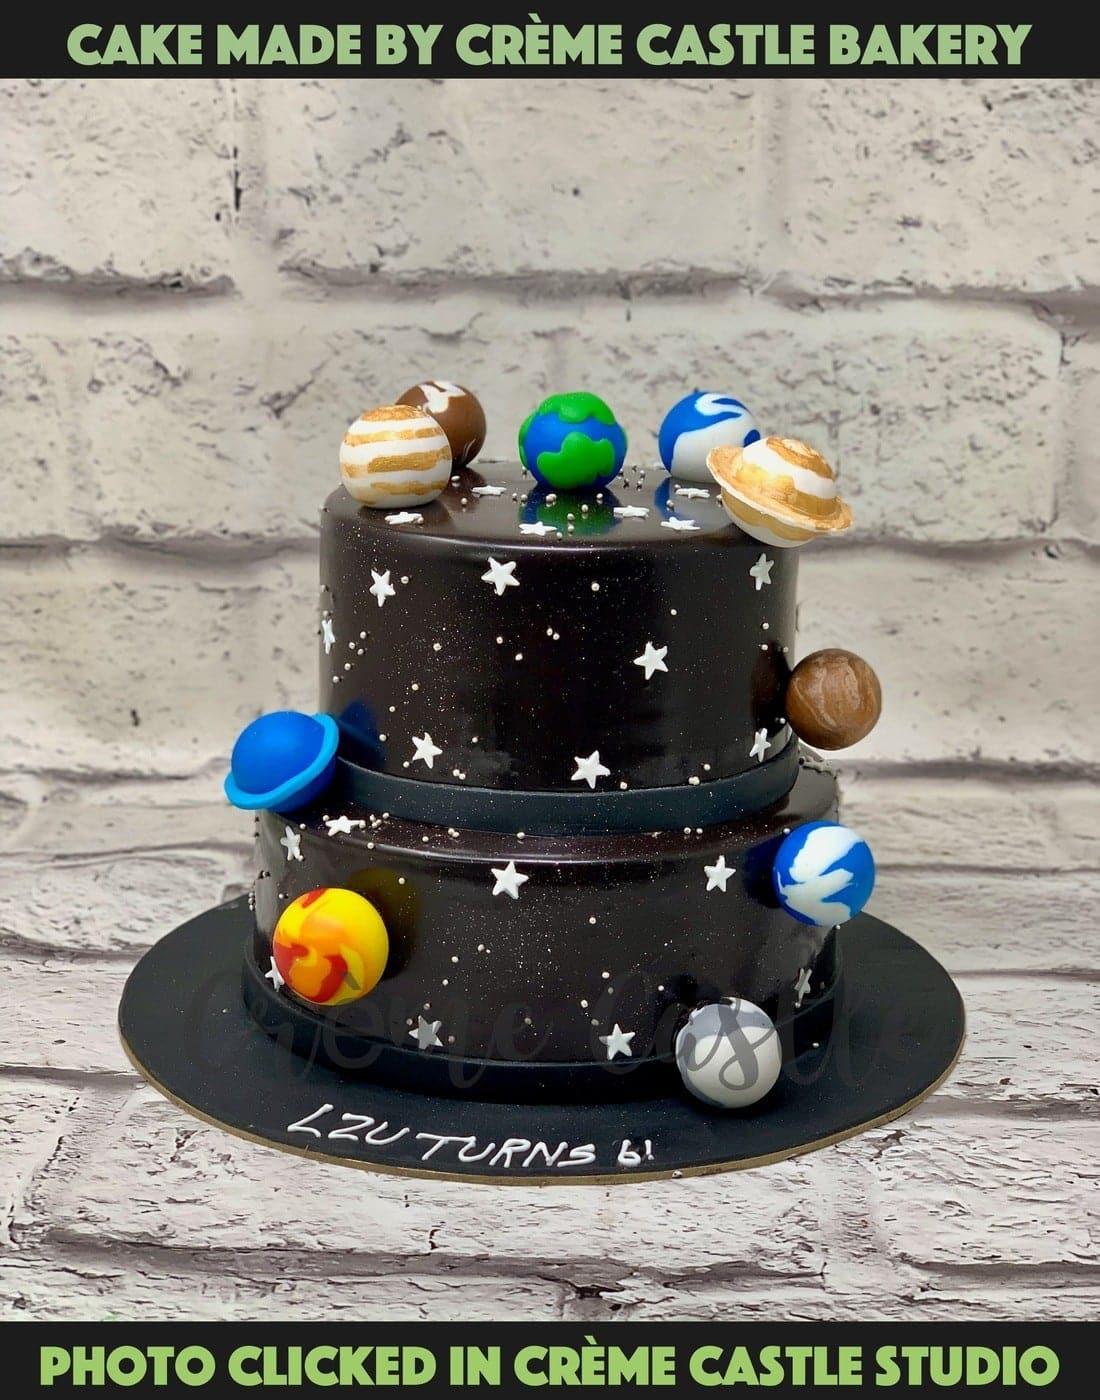 Solar System Theme Cake in 2 Tier by Creme Castle